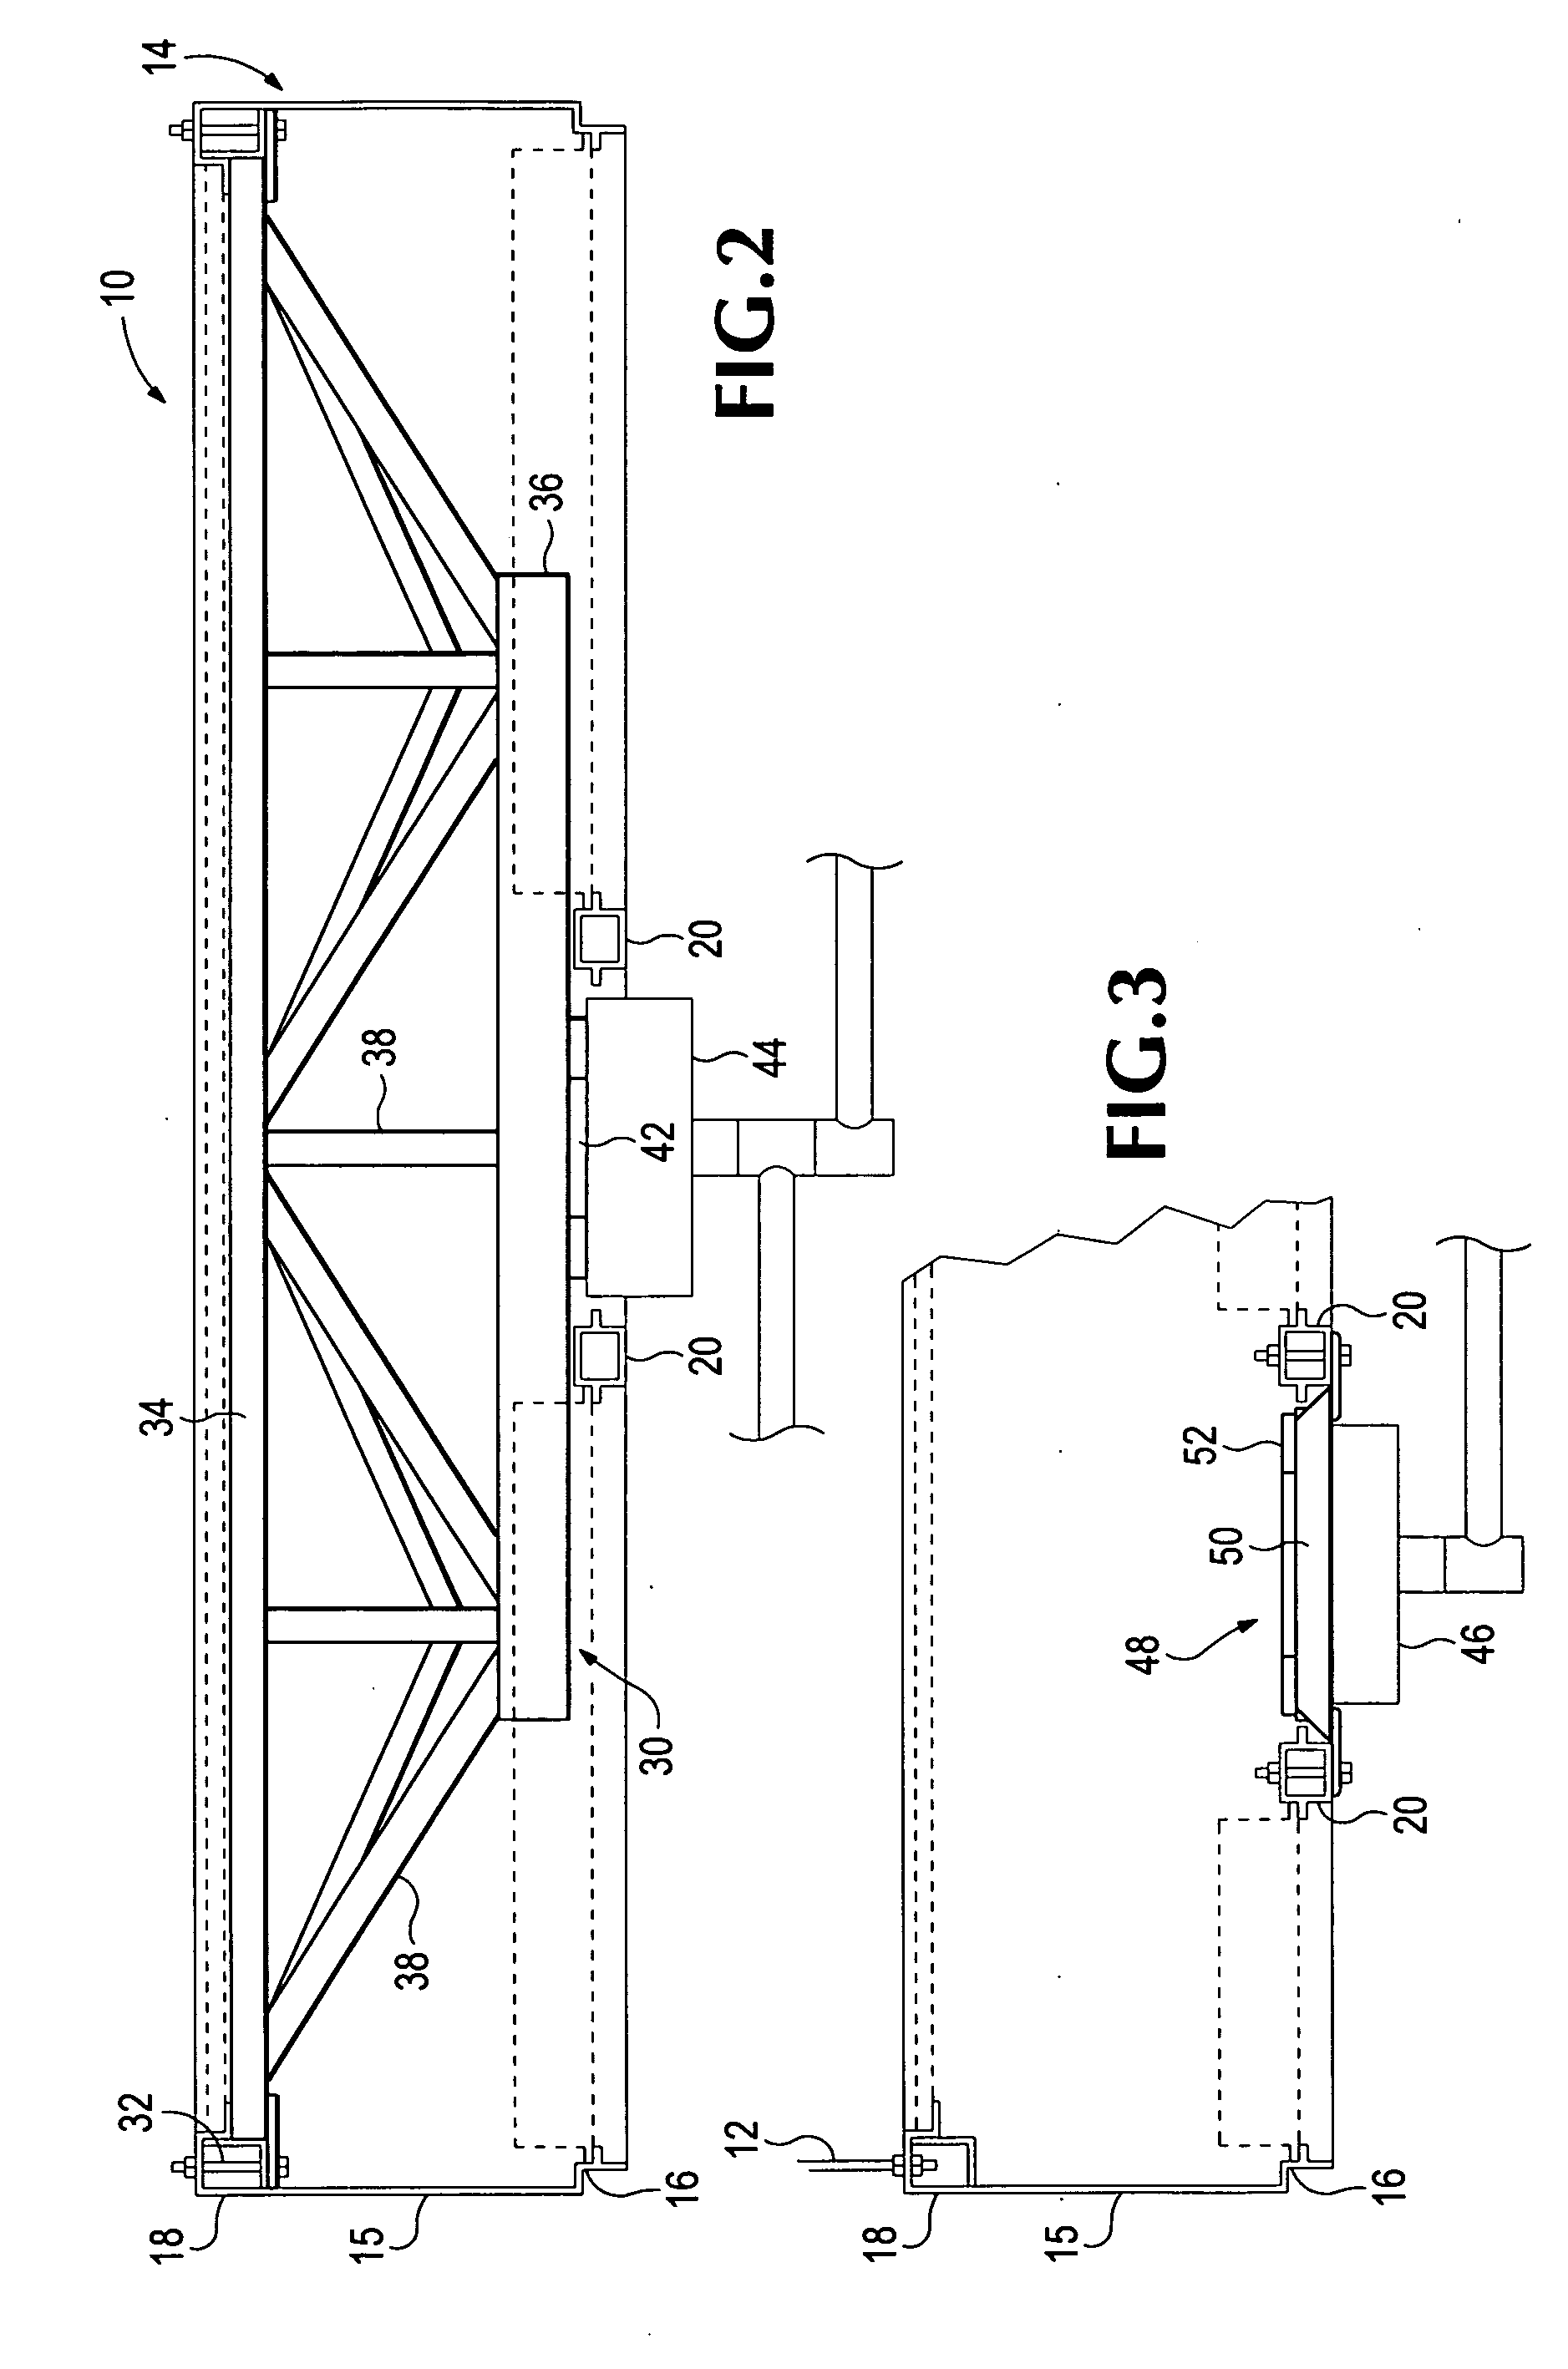 Ceiling system with integrated equipment support structure